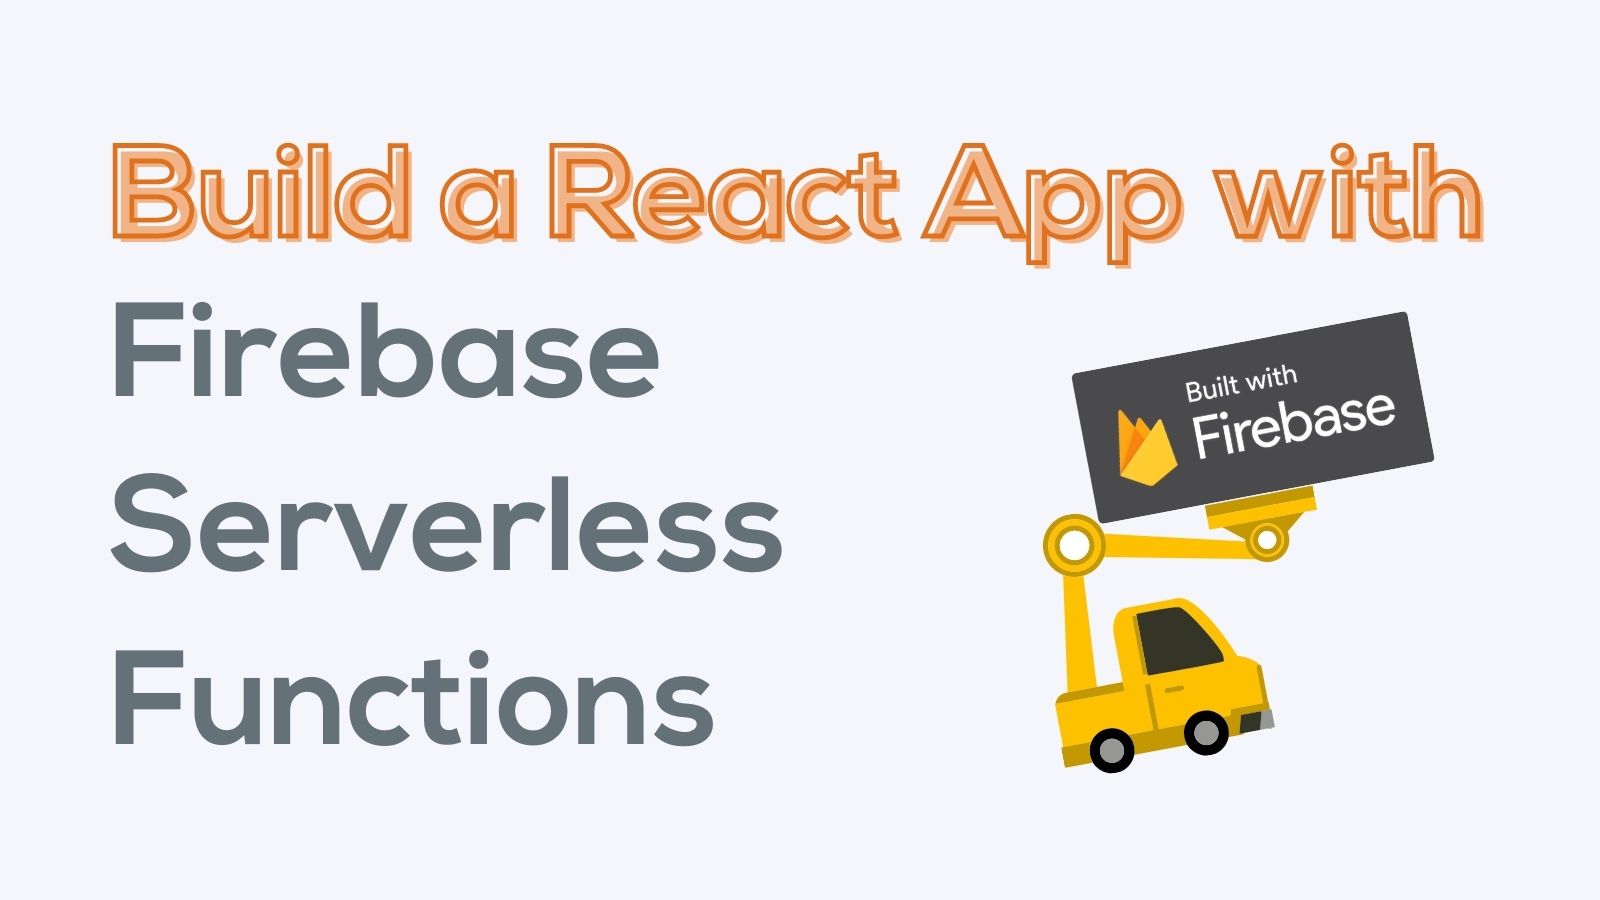 Build a React App with Firebase Serverless Functions